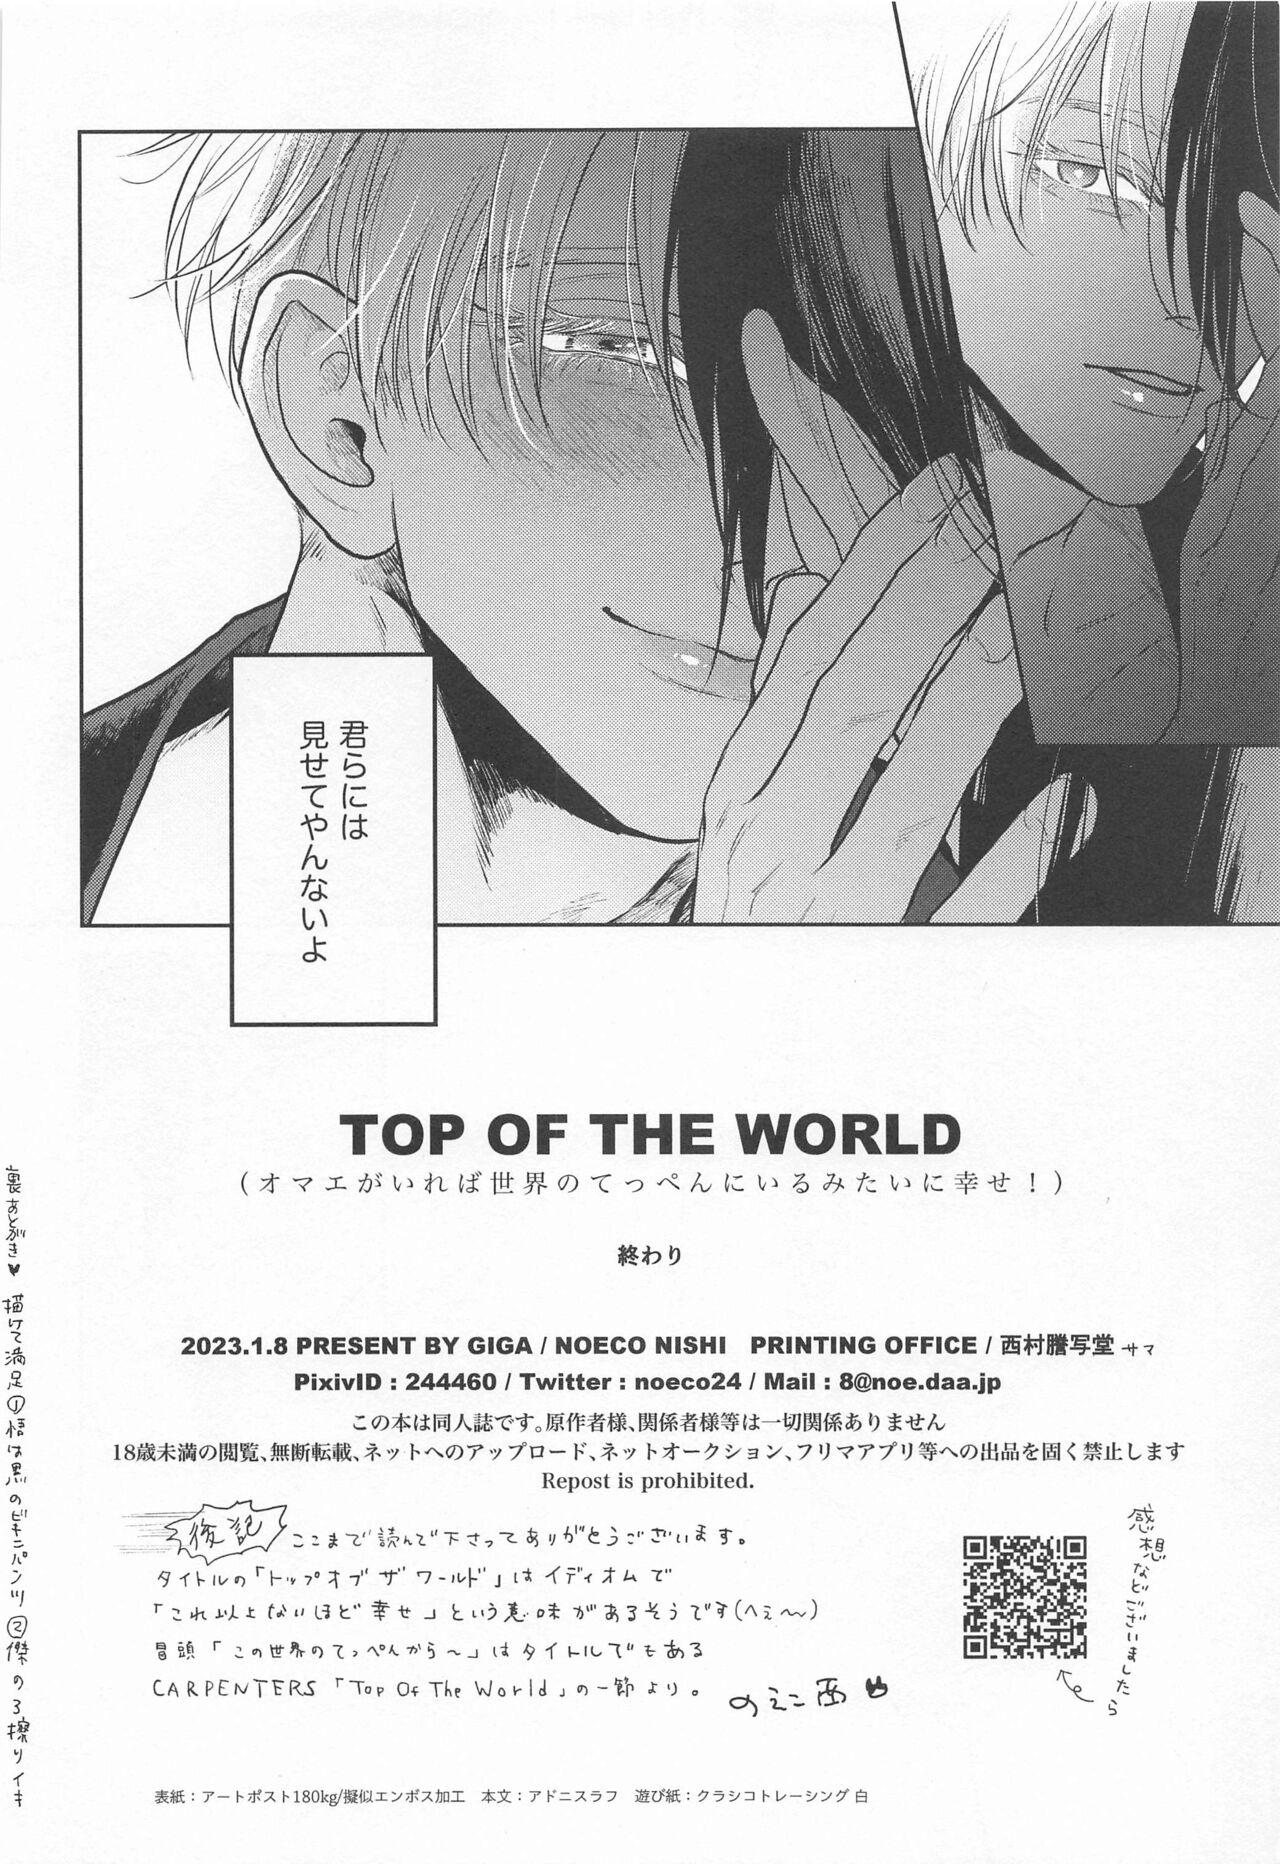 TOP OF THE WORLD 32